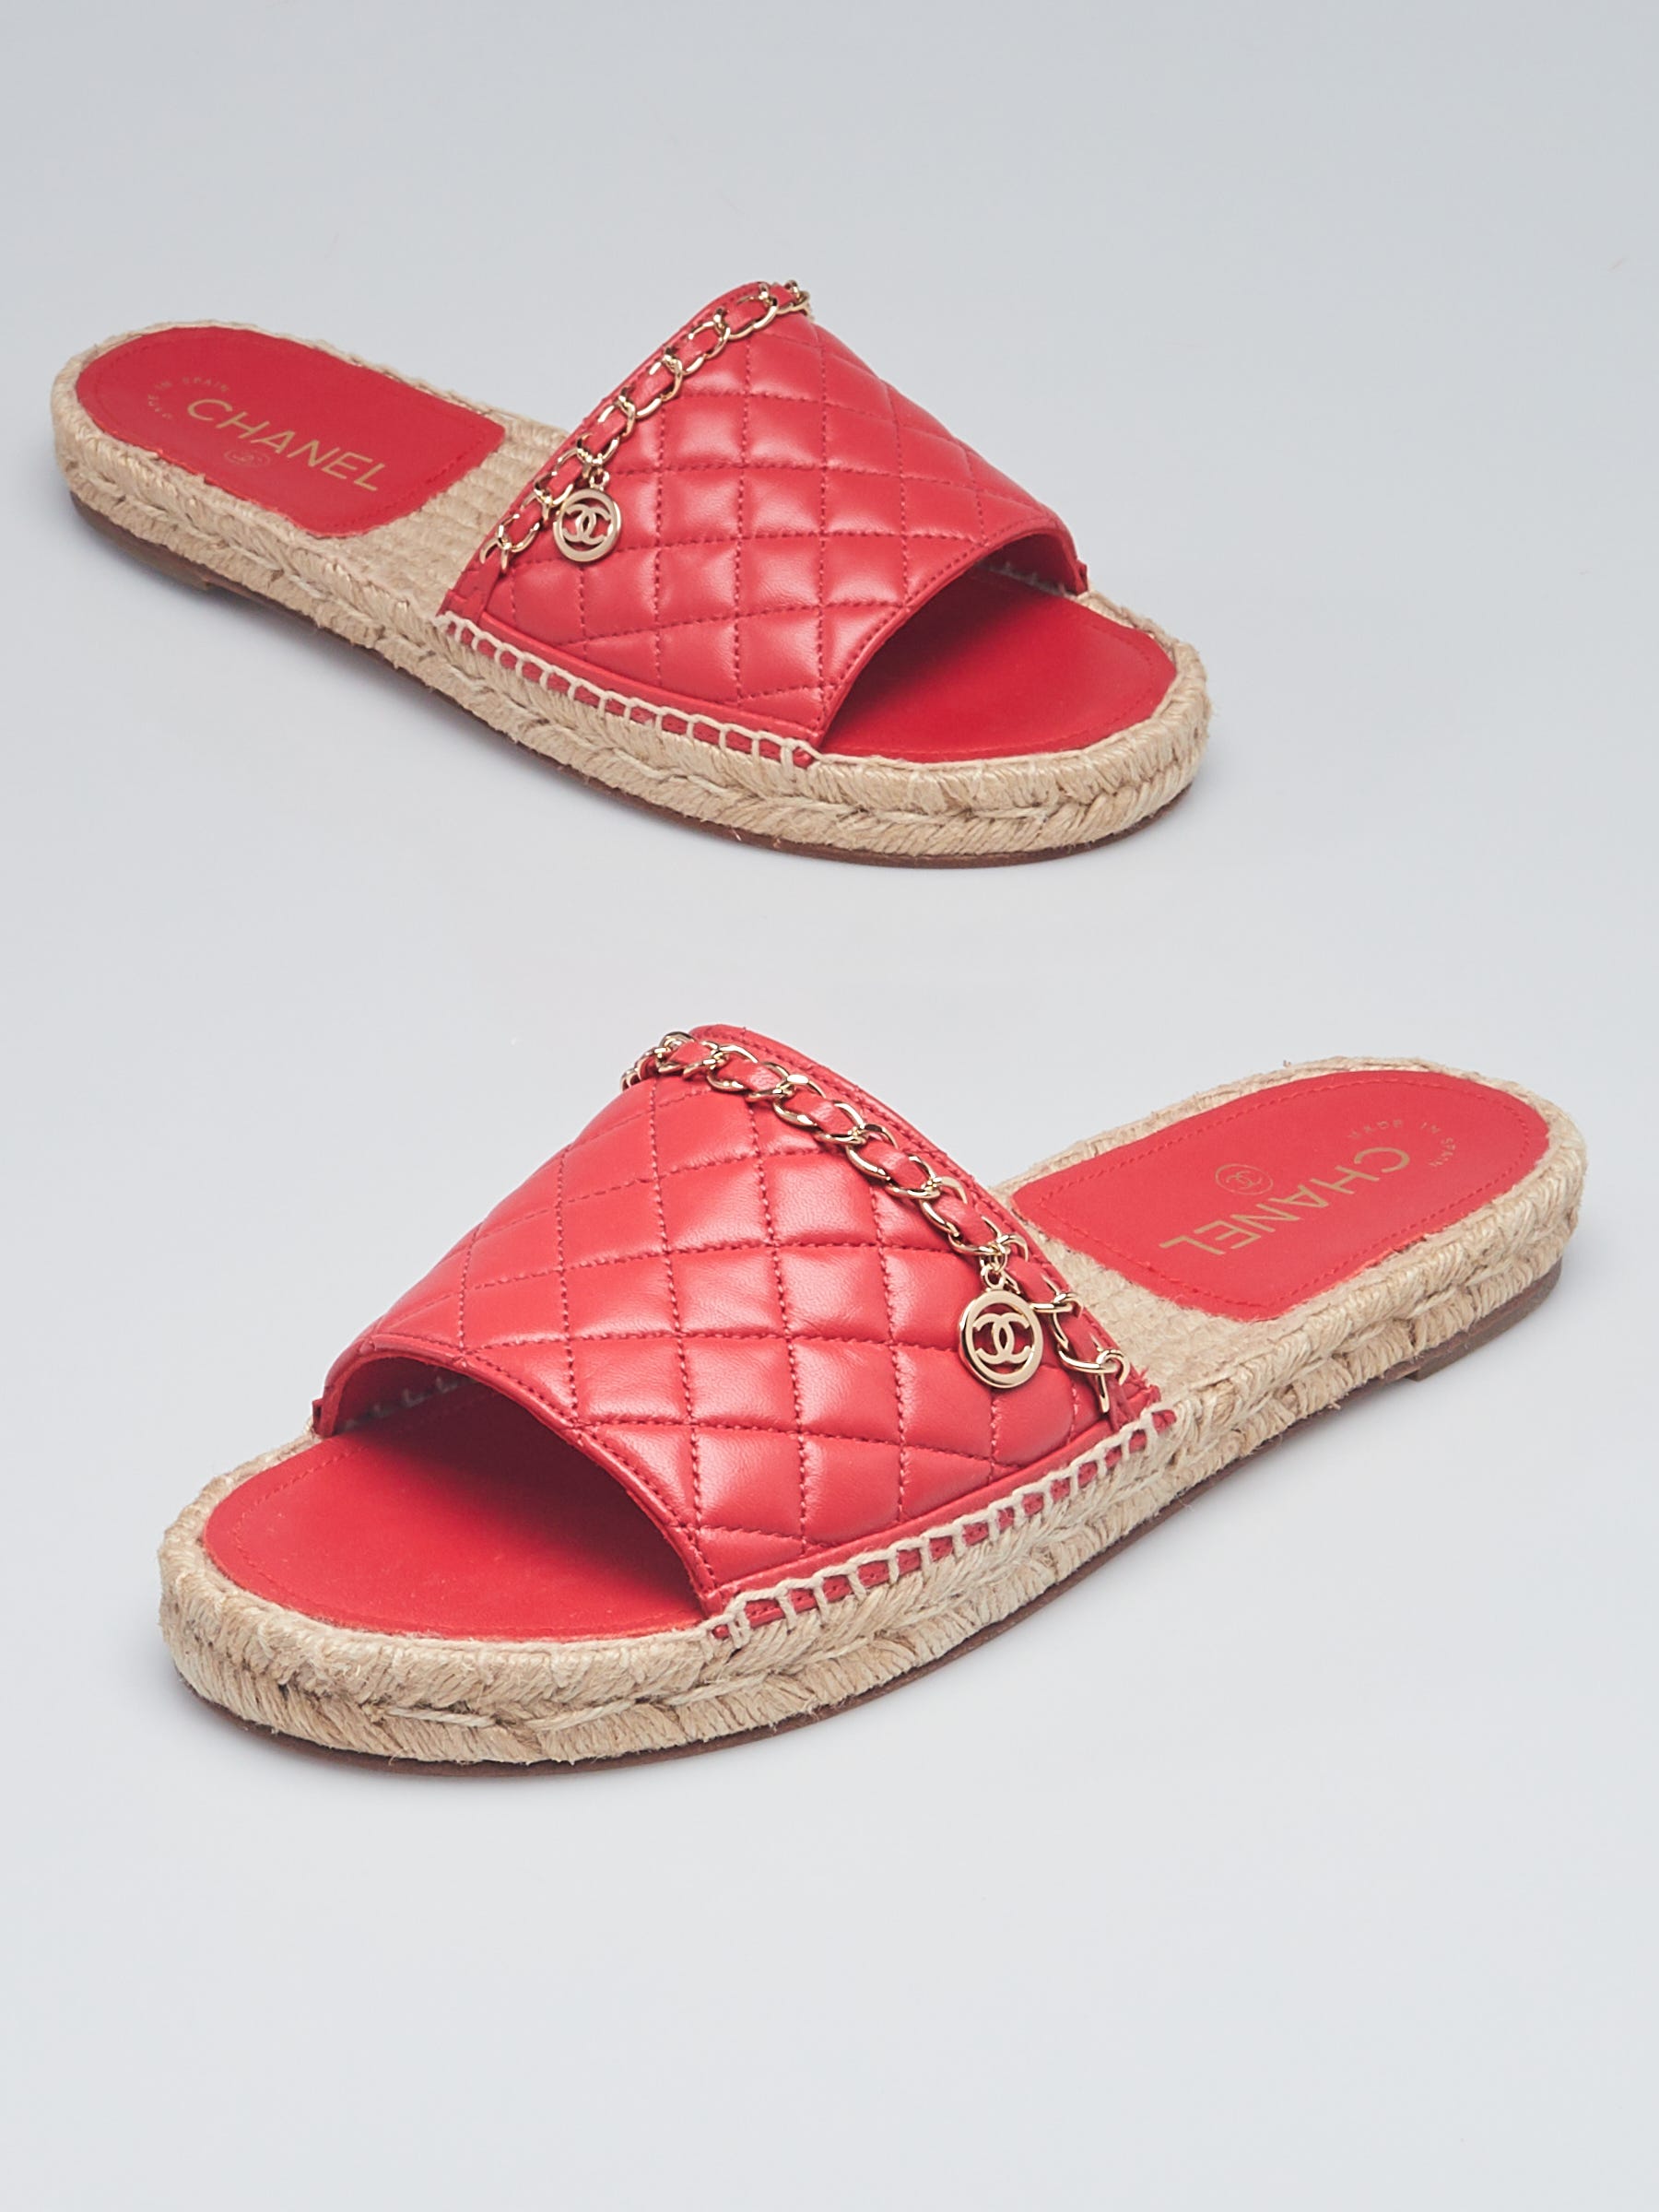 Chanel 21S CC Espadrille Flats in Pink Red White Tweed  39  I MISS YOU  VINTAGE